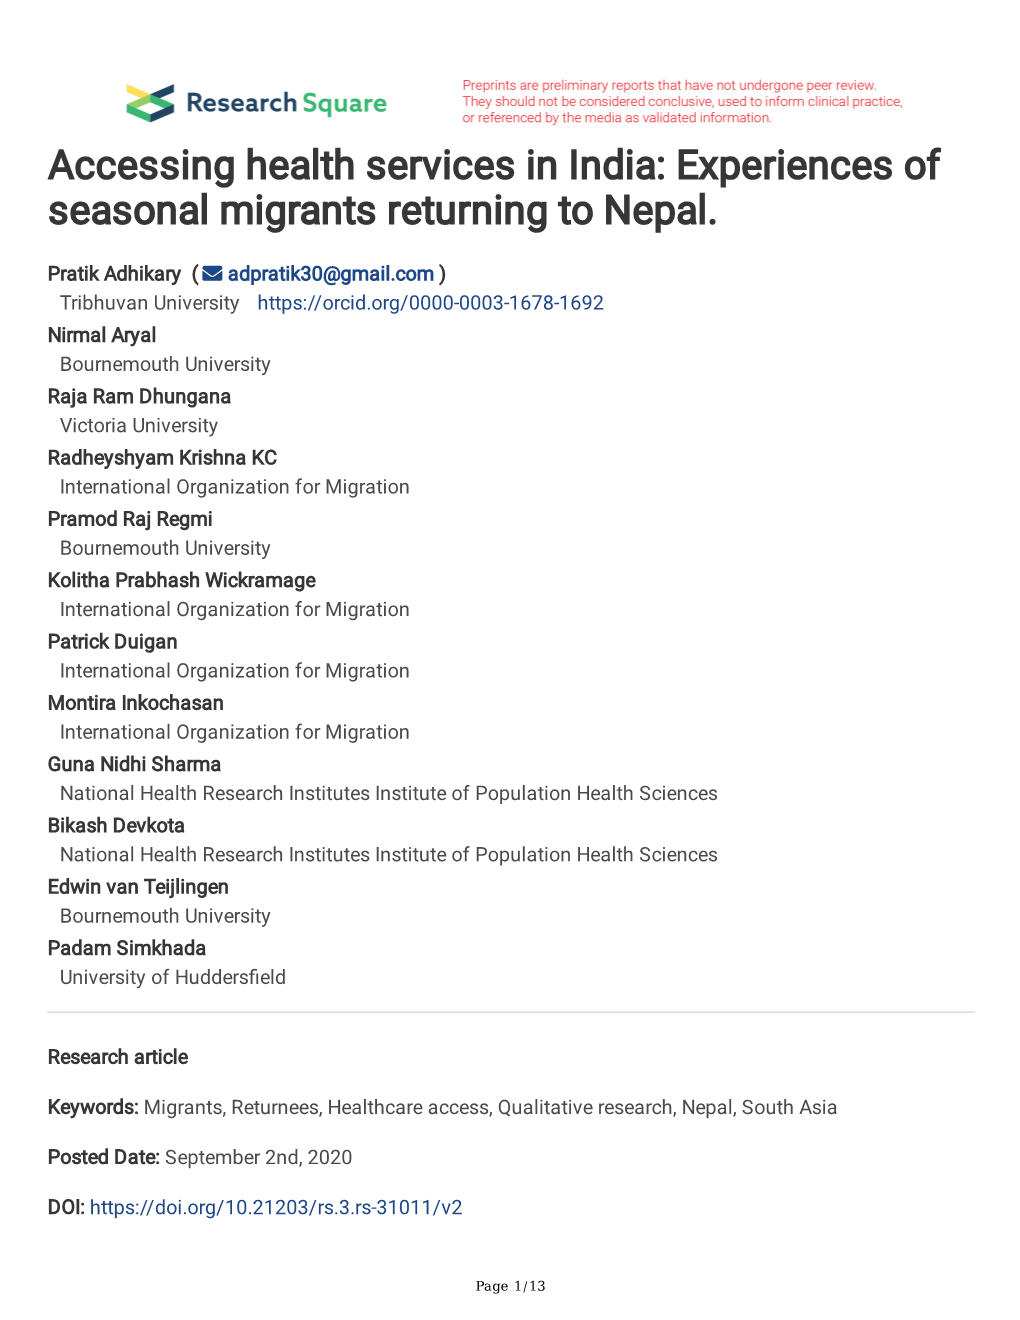 Accessing Health Services in India: Experiences of Seasonal Migrants Returning to Nepal